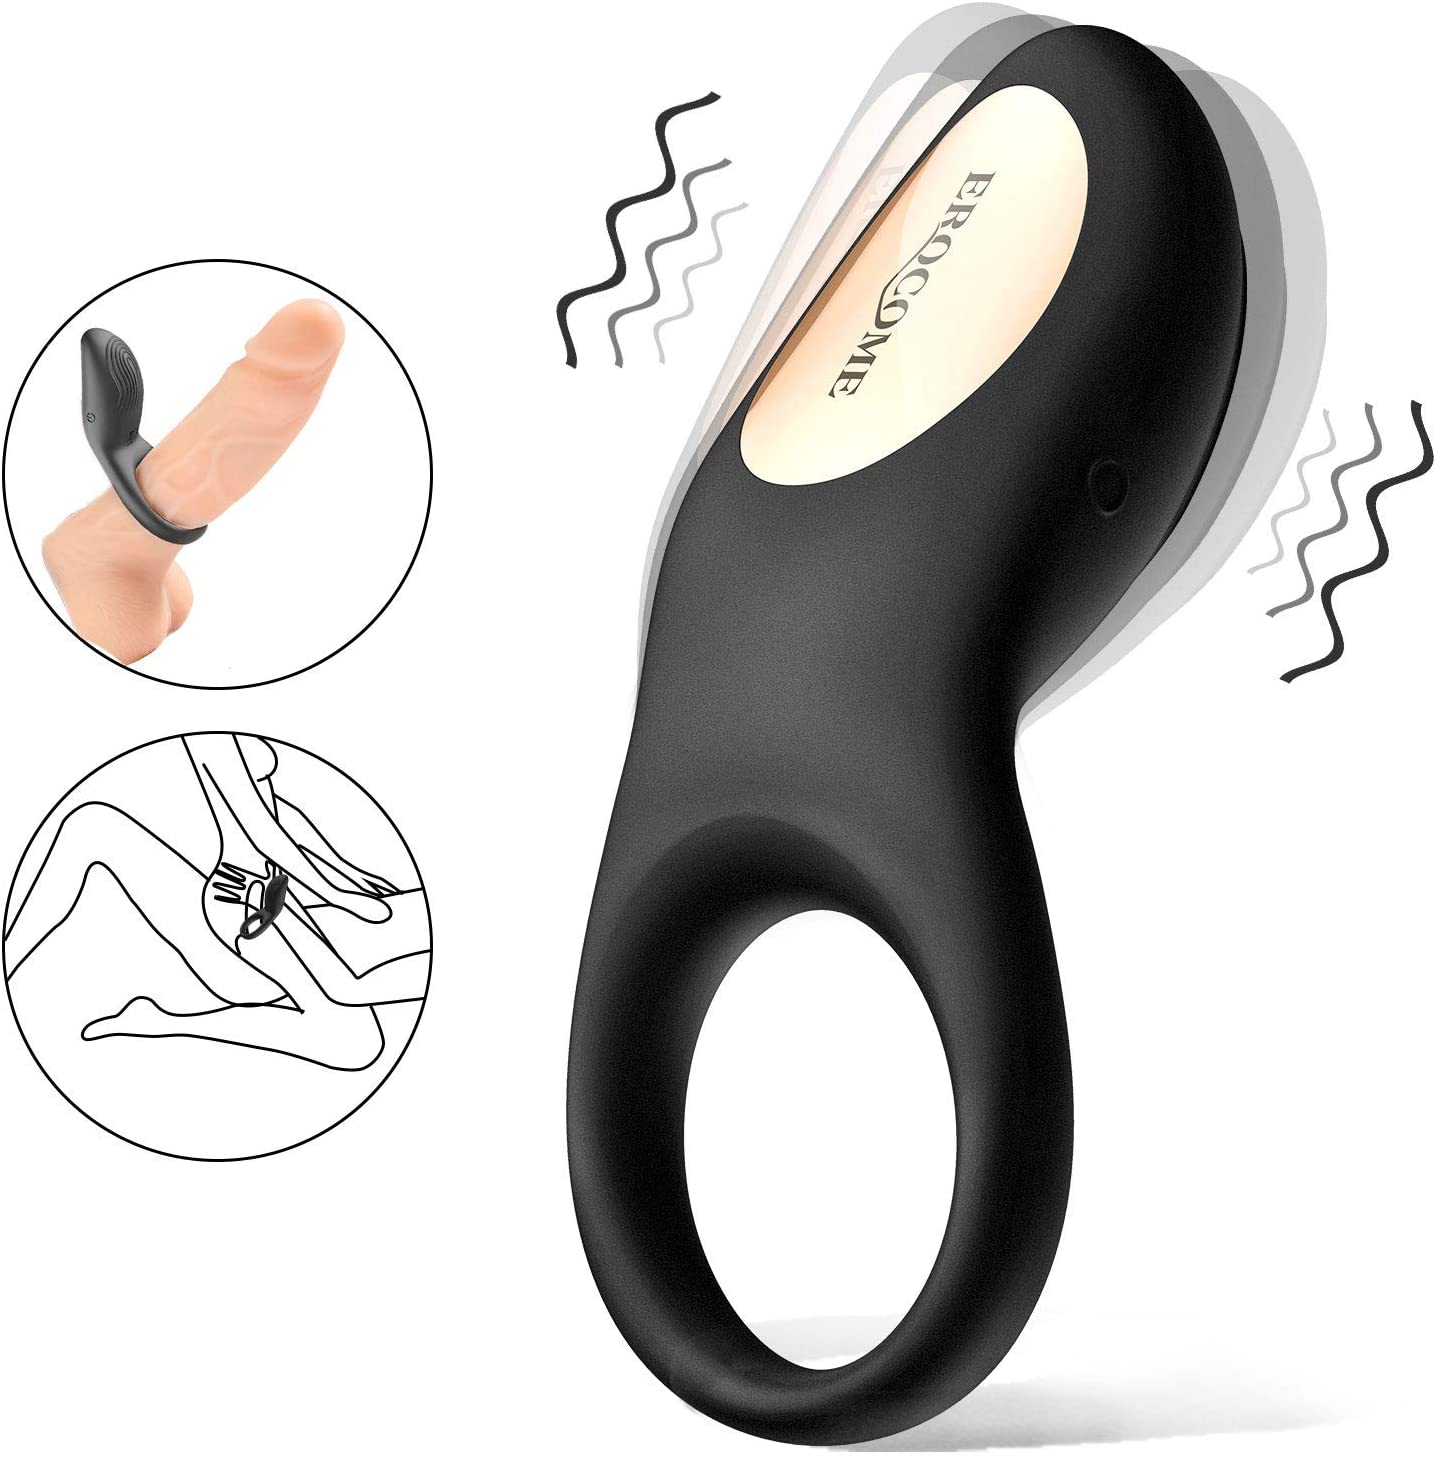 8 Vibration Modes Wireless Remote Control Penis Ring - Lusty Age